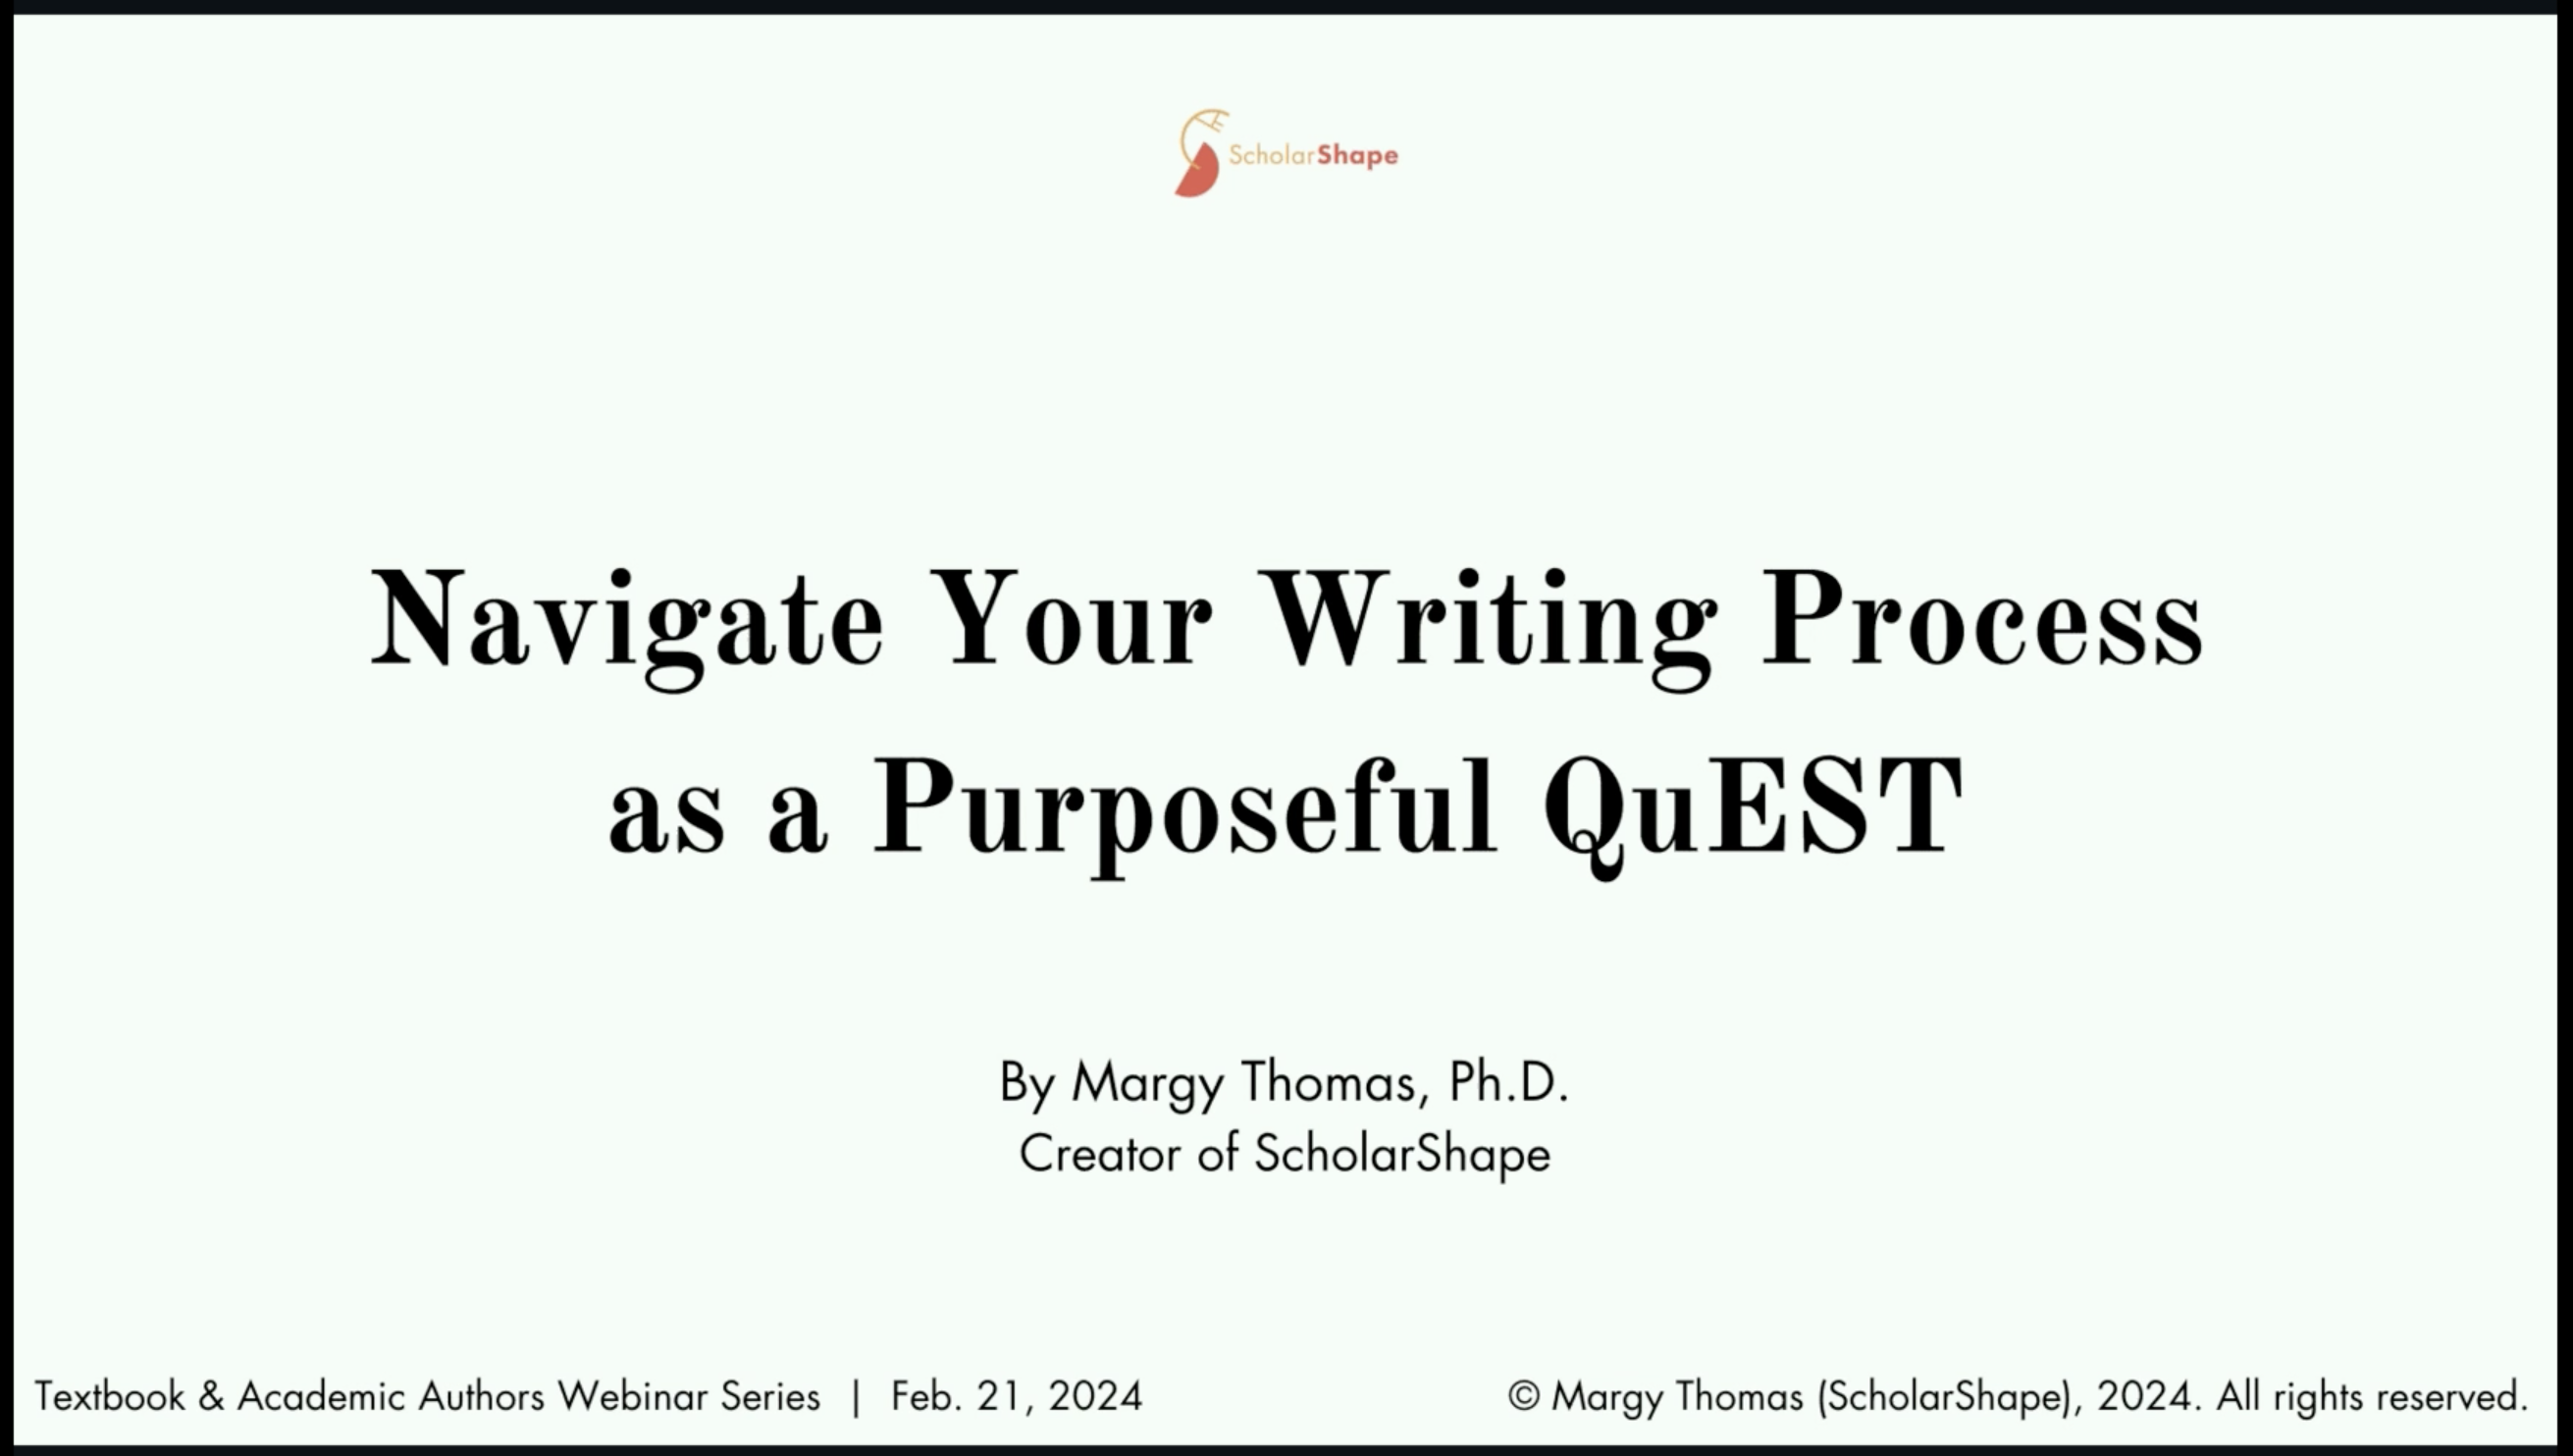 Navigate Your Writing Process as a Purposeful Quest